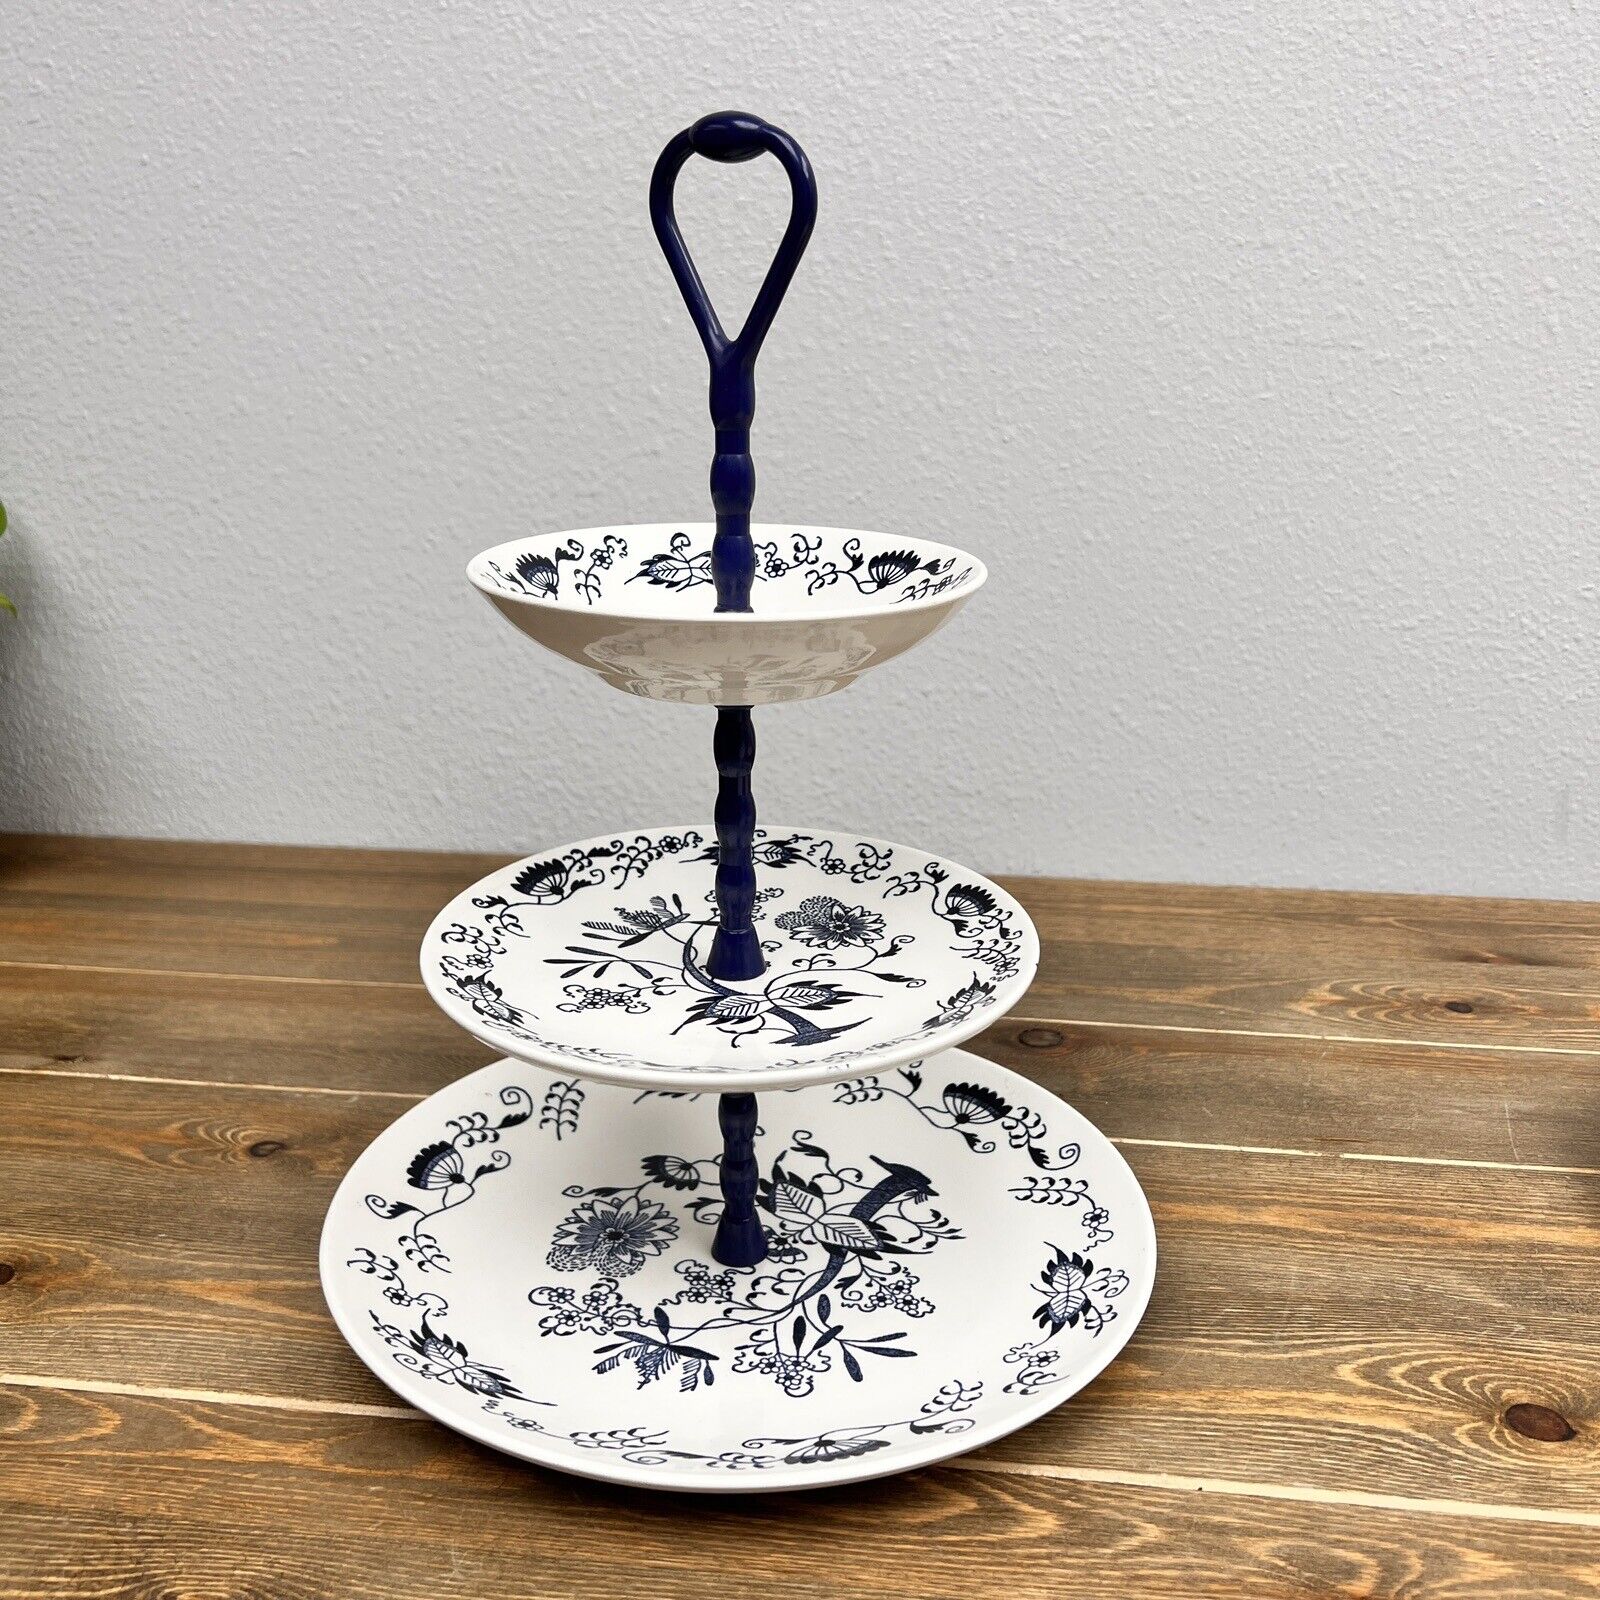 Vintage 3 Tier Serving Tray Plates Gailstyn Co Blue Lin 611 Blue Lin  Made USA